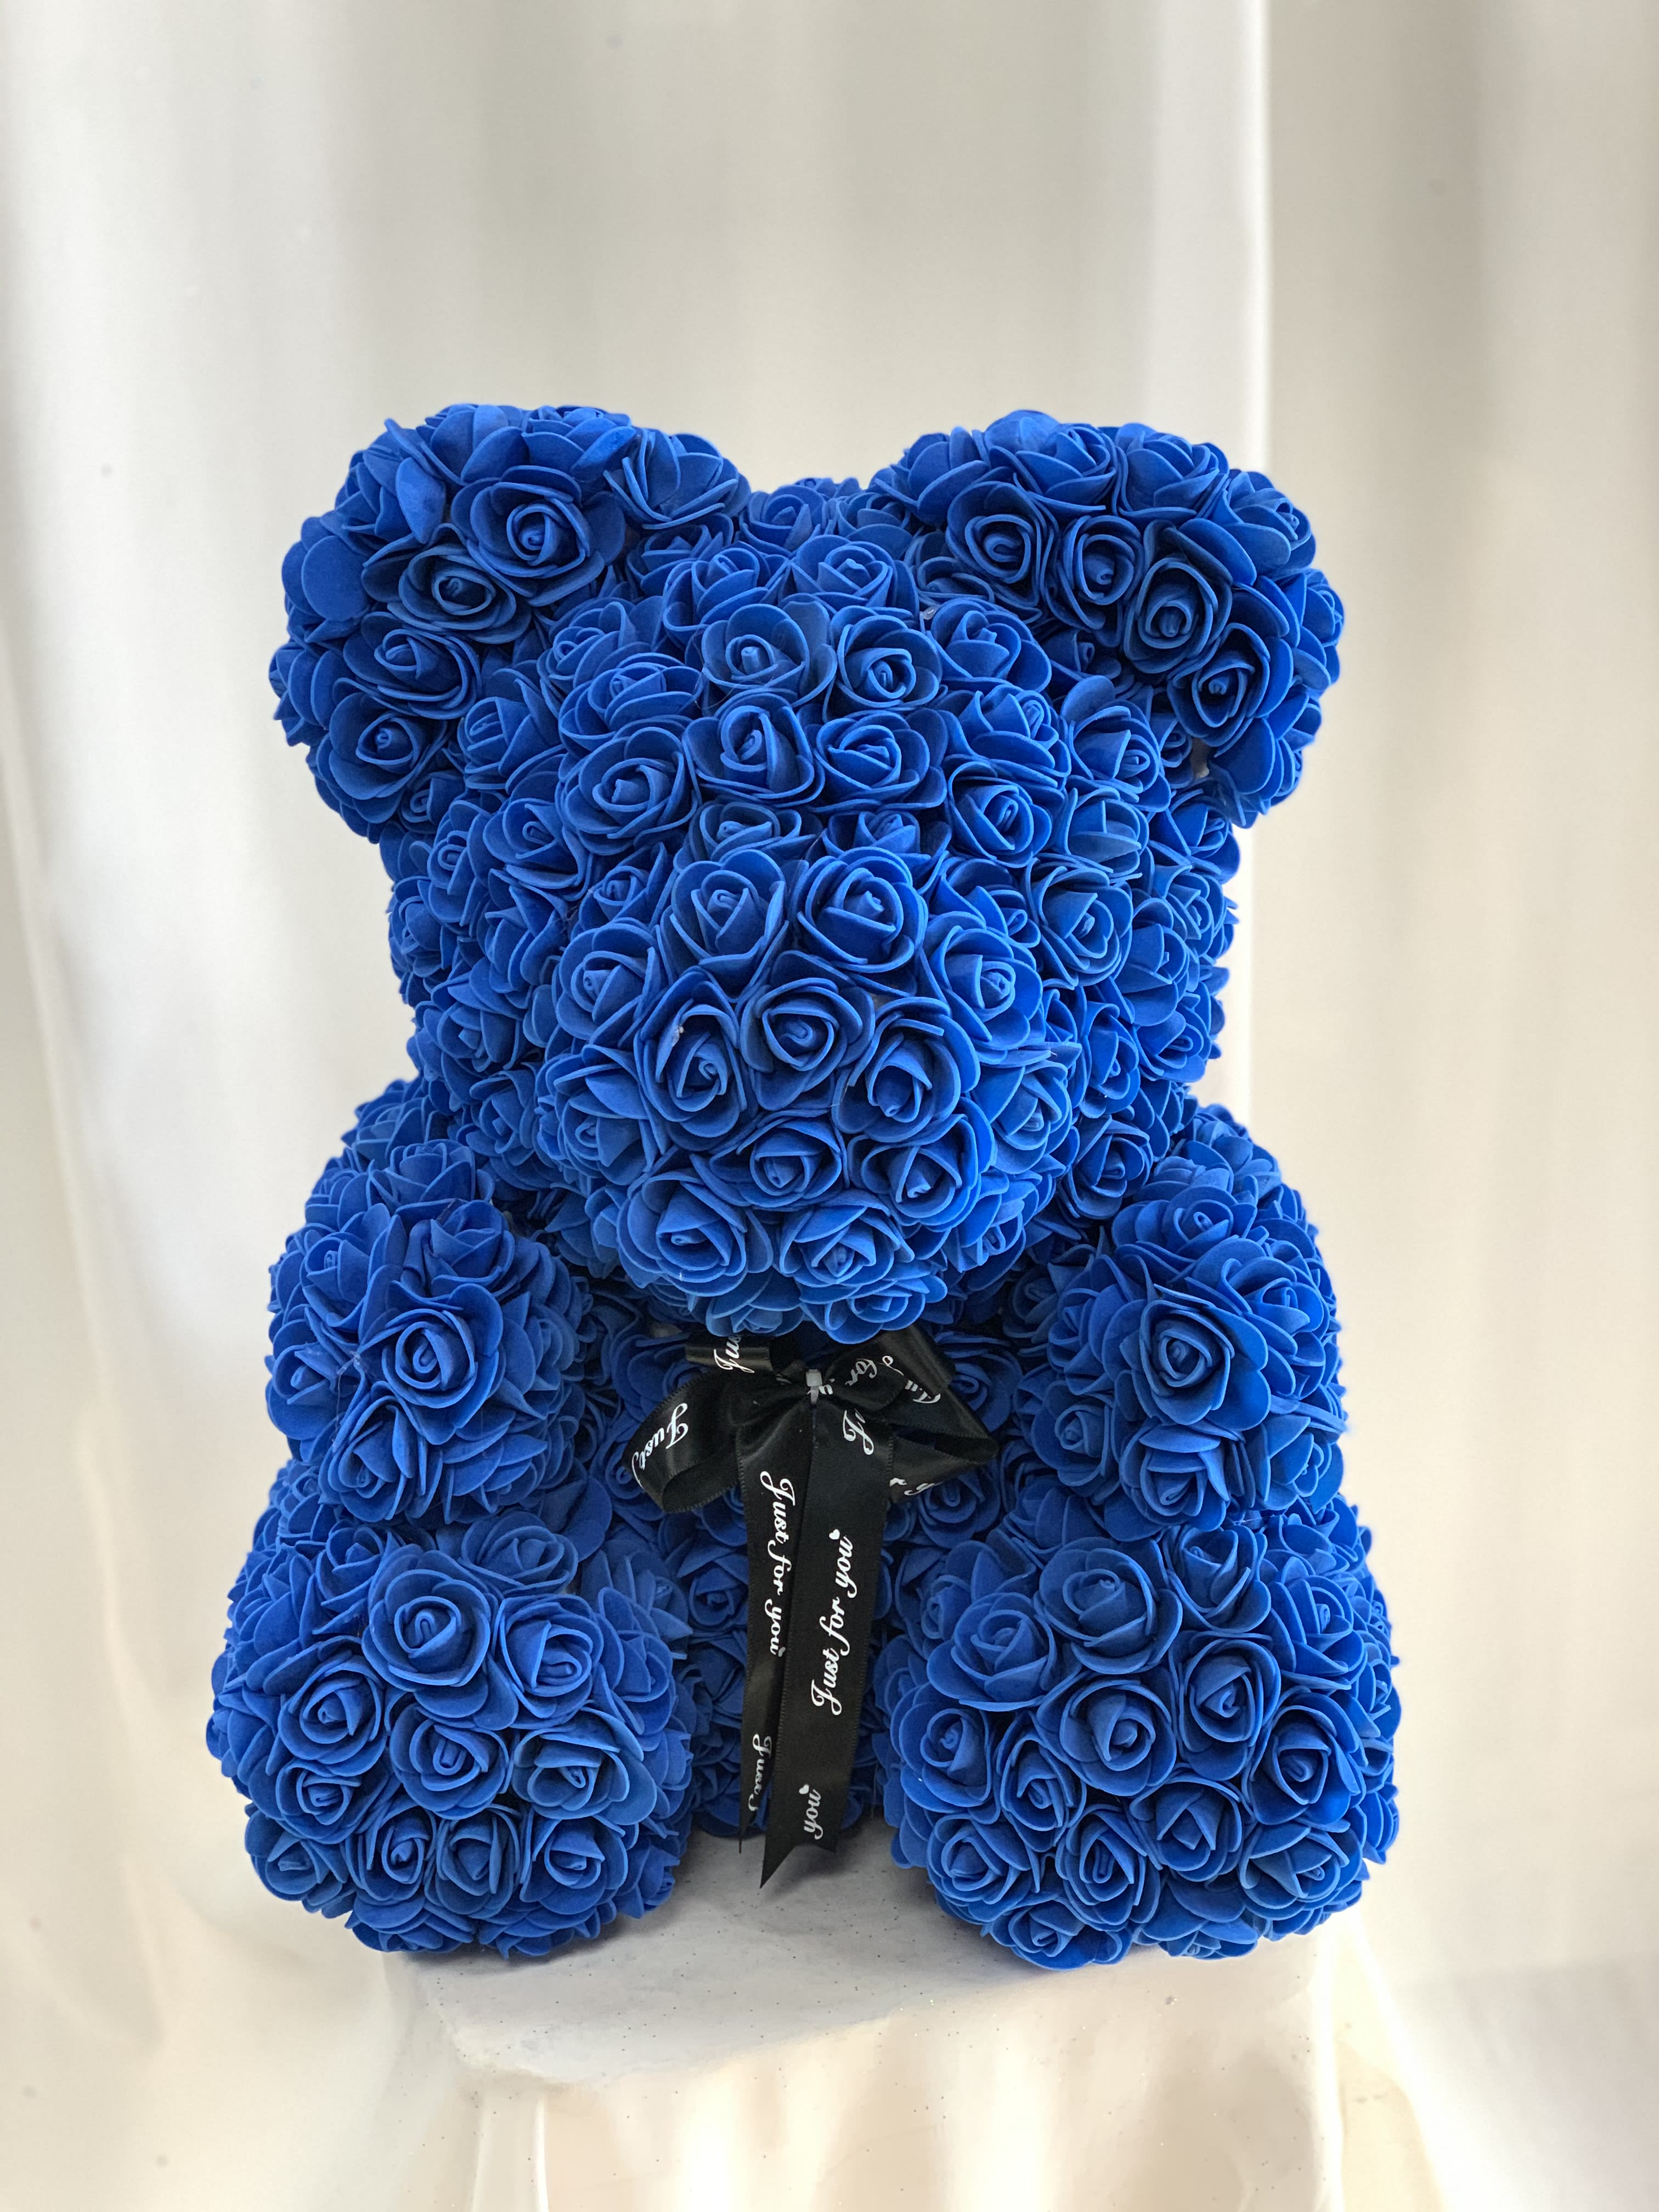 Faux Blue Rose Teddy Bear by Four Season Florist and Gifts